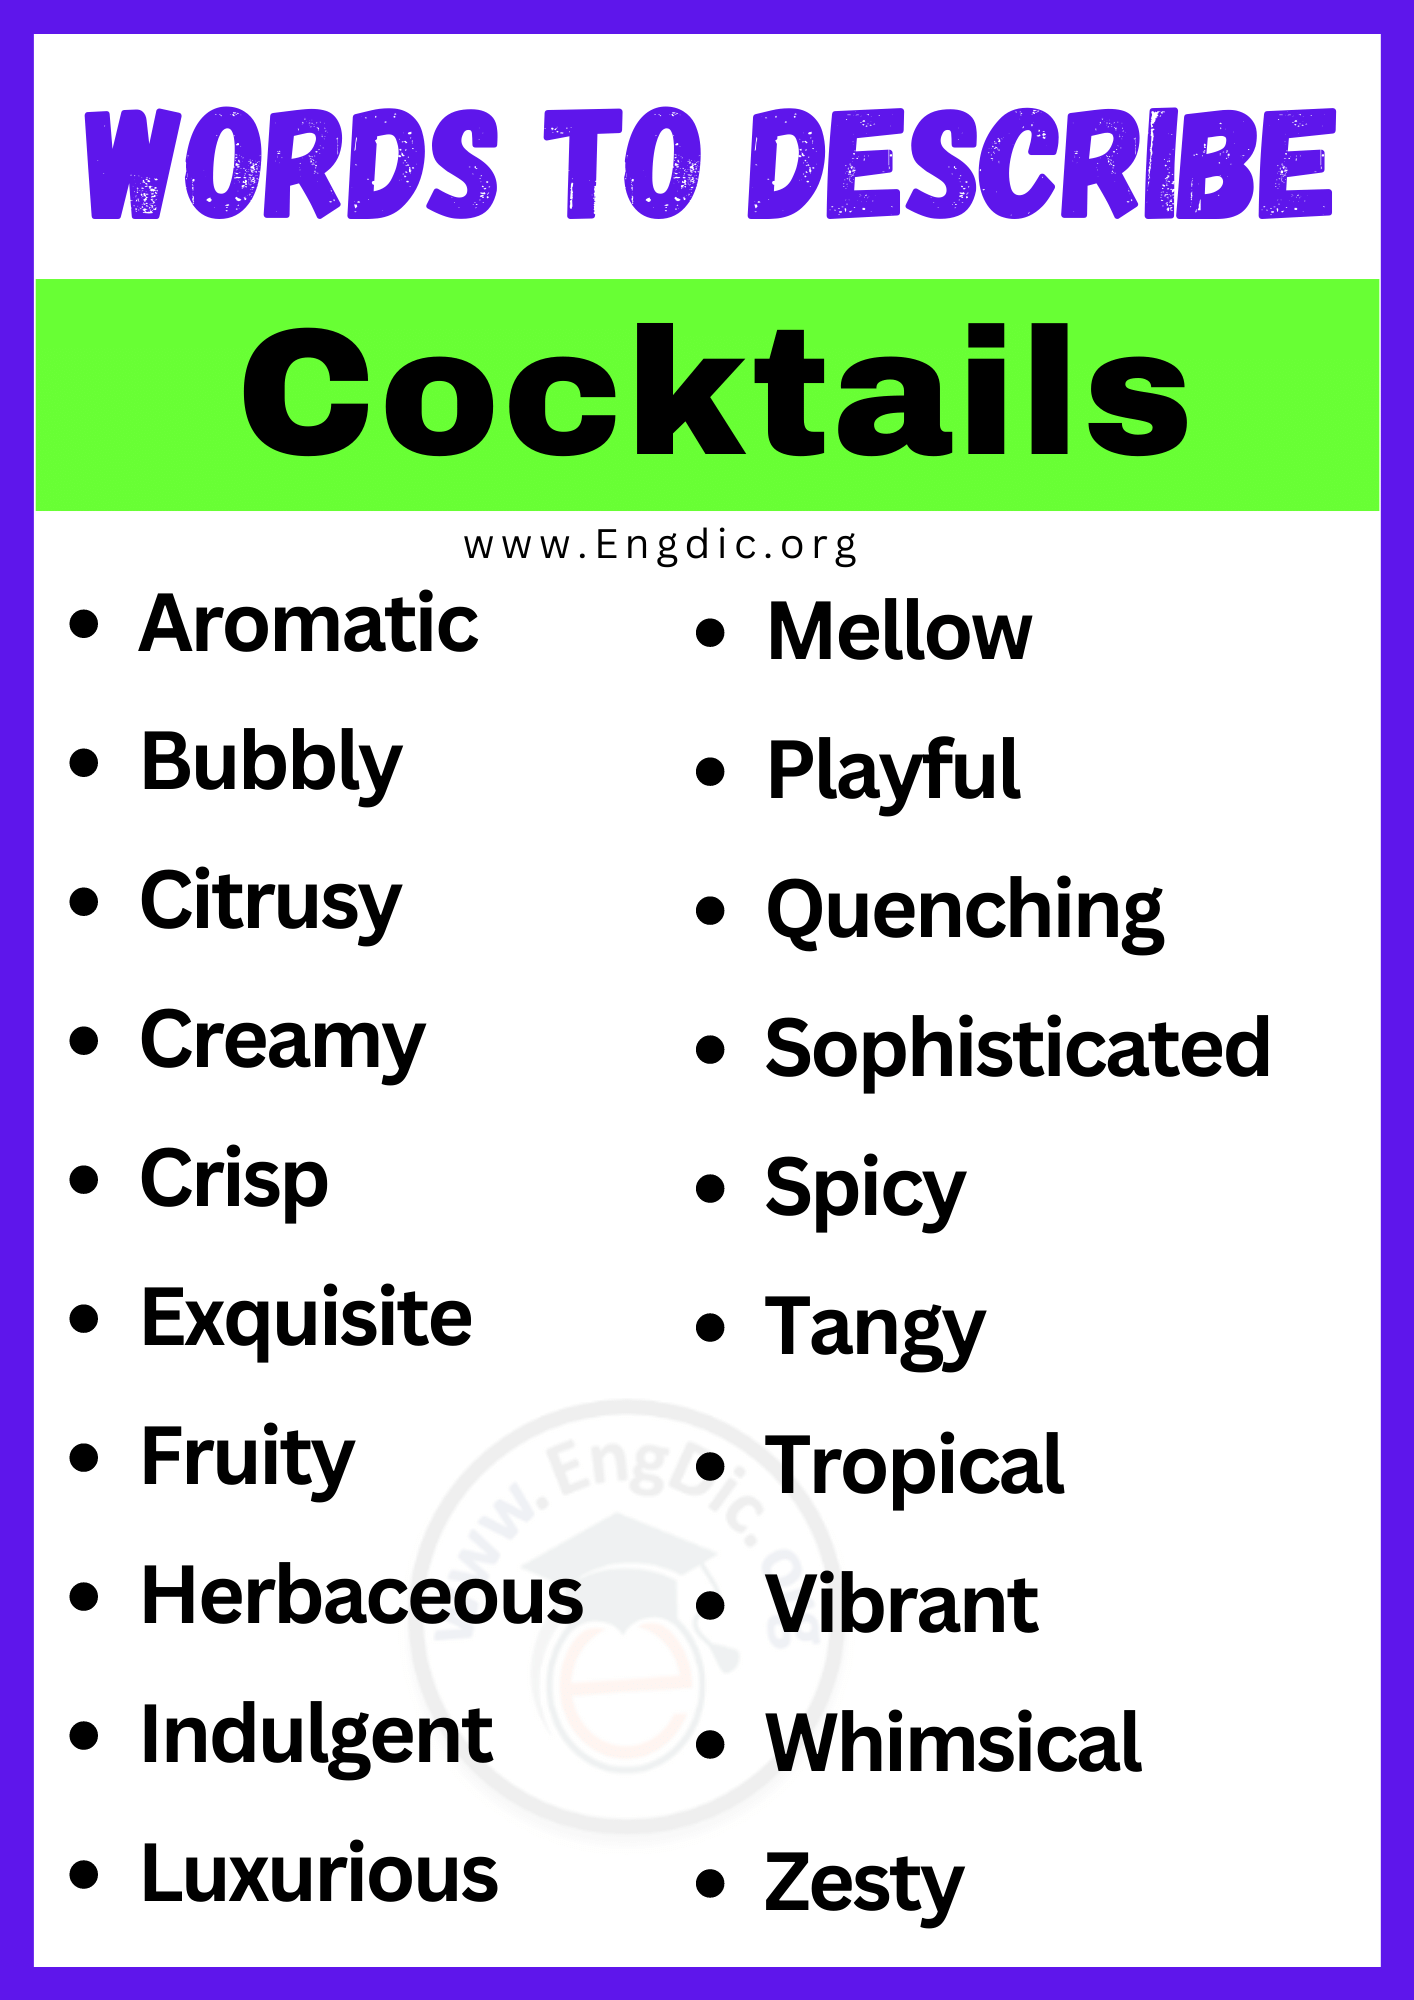 Words to Describe Cocktails